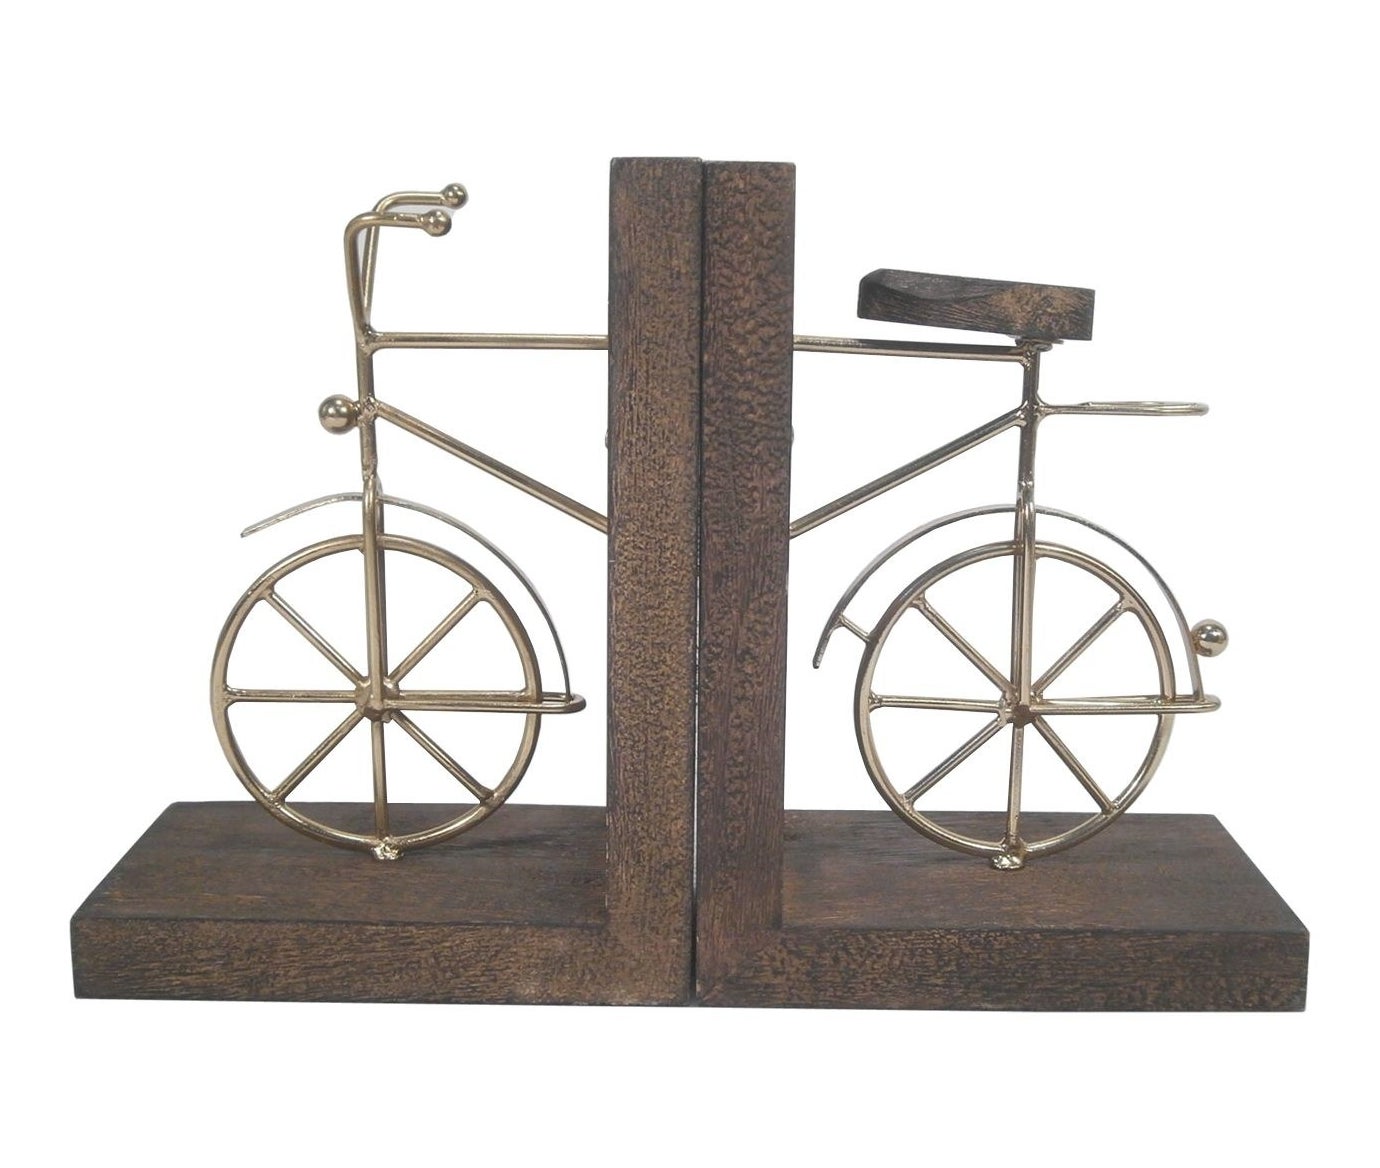 The two bookends, with a metal design of the front and back of a bike